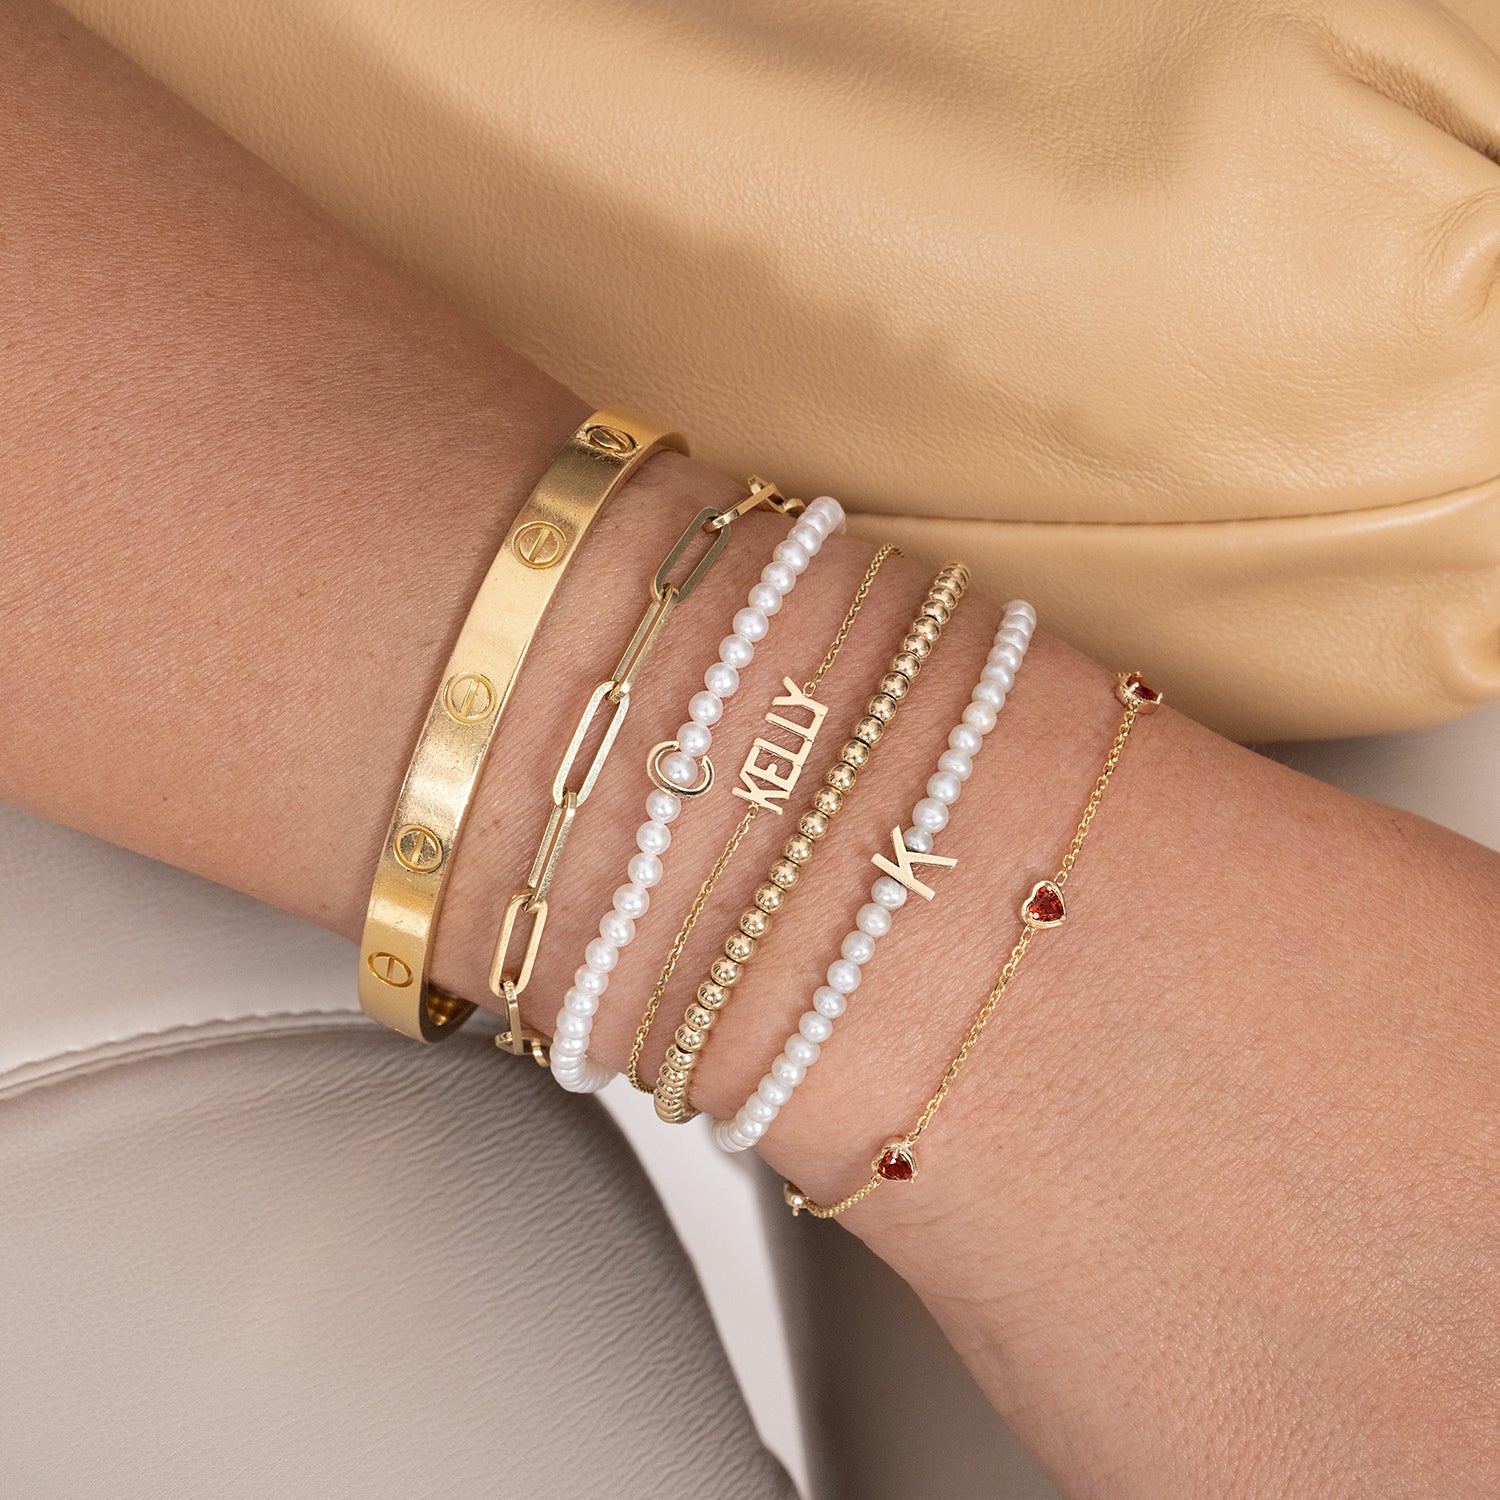 Want to buy a bracelet with name? All jewelry online - KAYA jewels webshop  - a beautiful memory